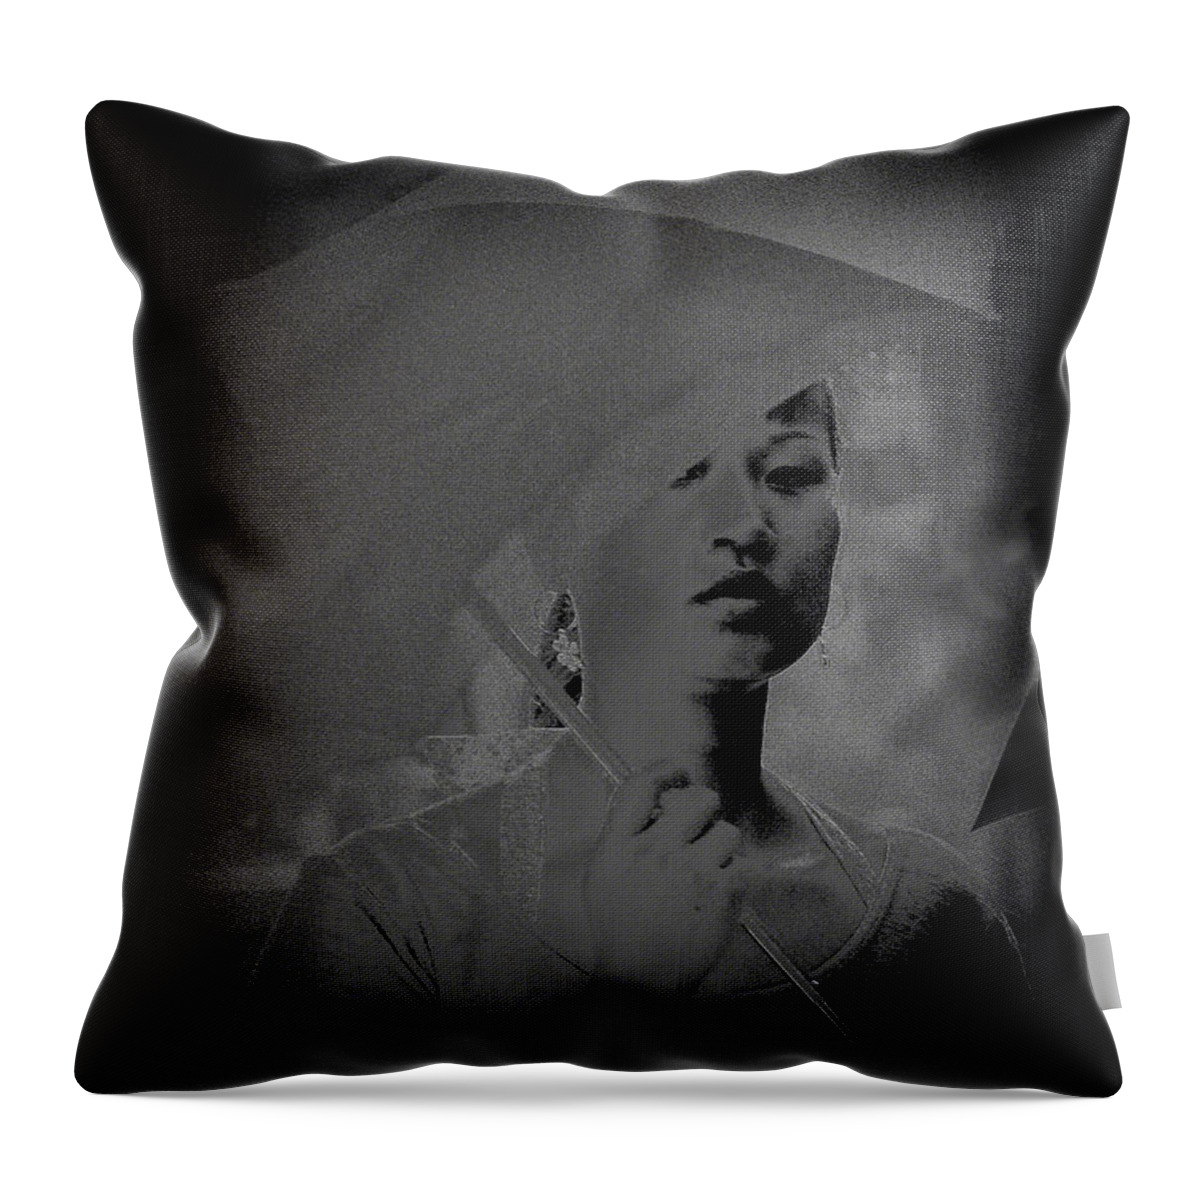 China Throw Pillow featuring the photograph Girl with umbrella by Patrick Kain